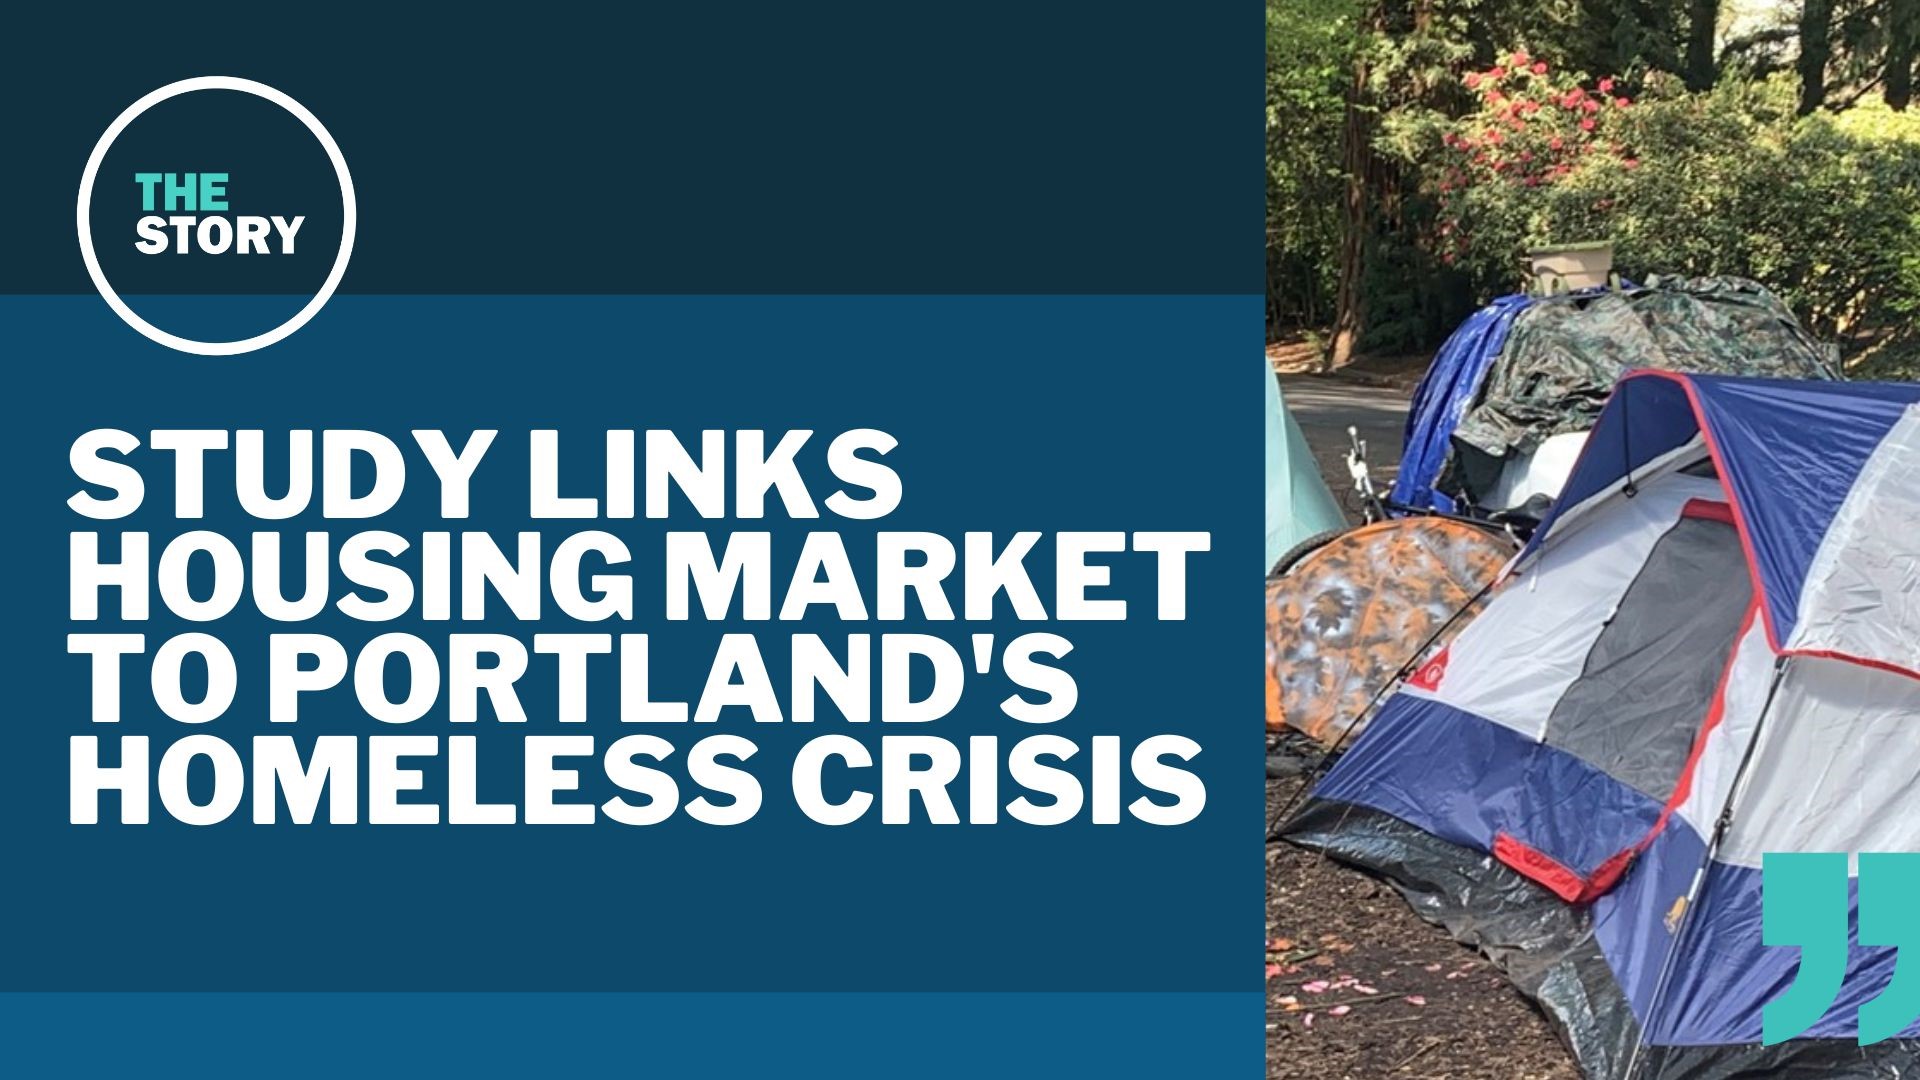 A new study by a pair of researchers revealed how Portland's housing market plays a much bigger part in the crisis than many might think.